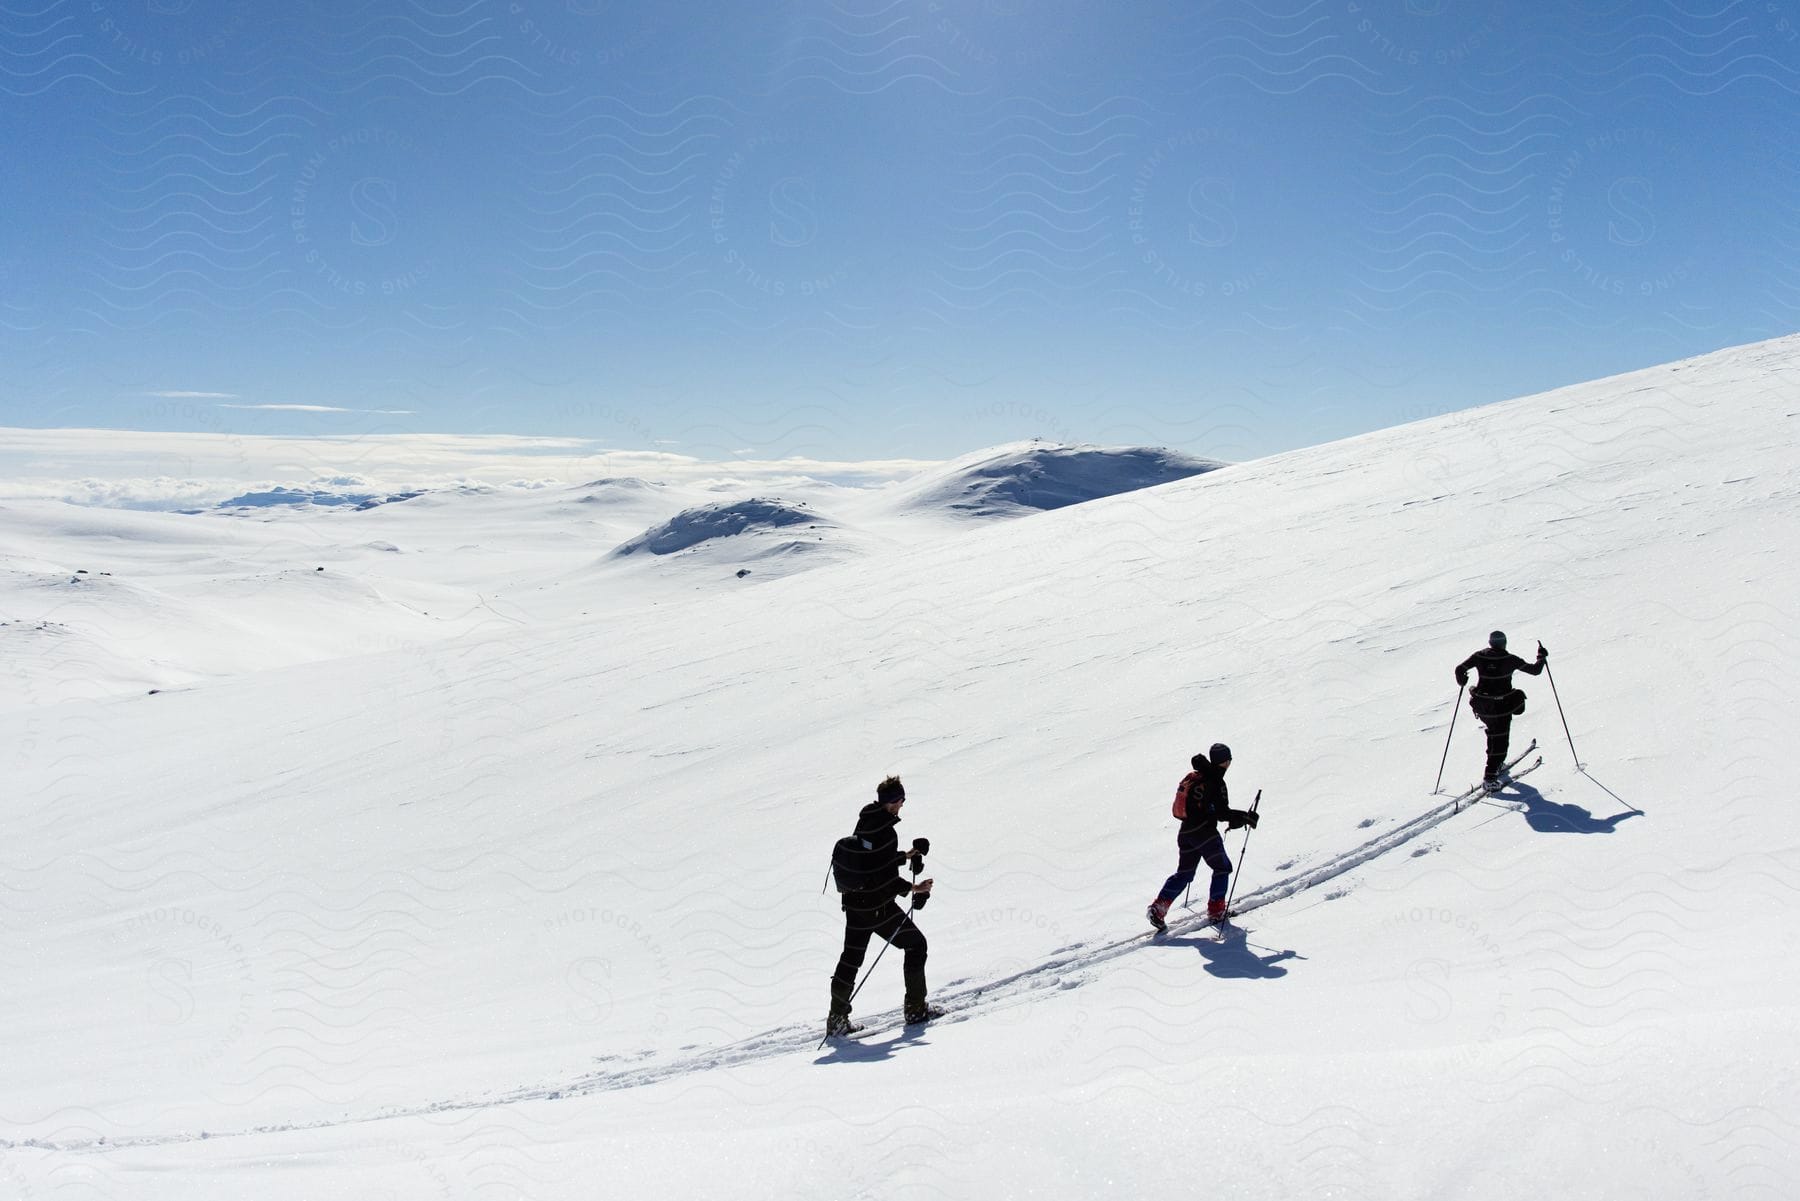 Three people are skiing up a mountain on a sunny day with a blue sky